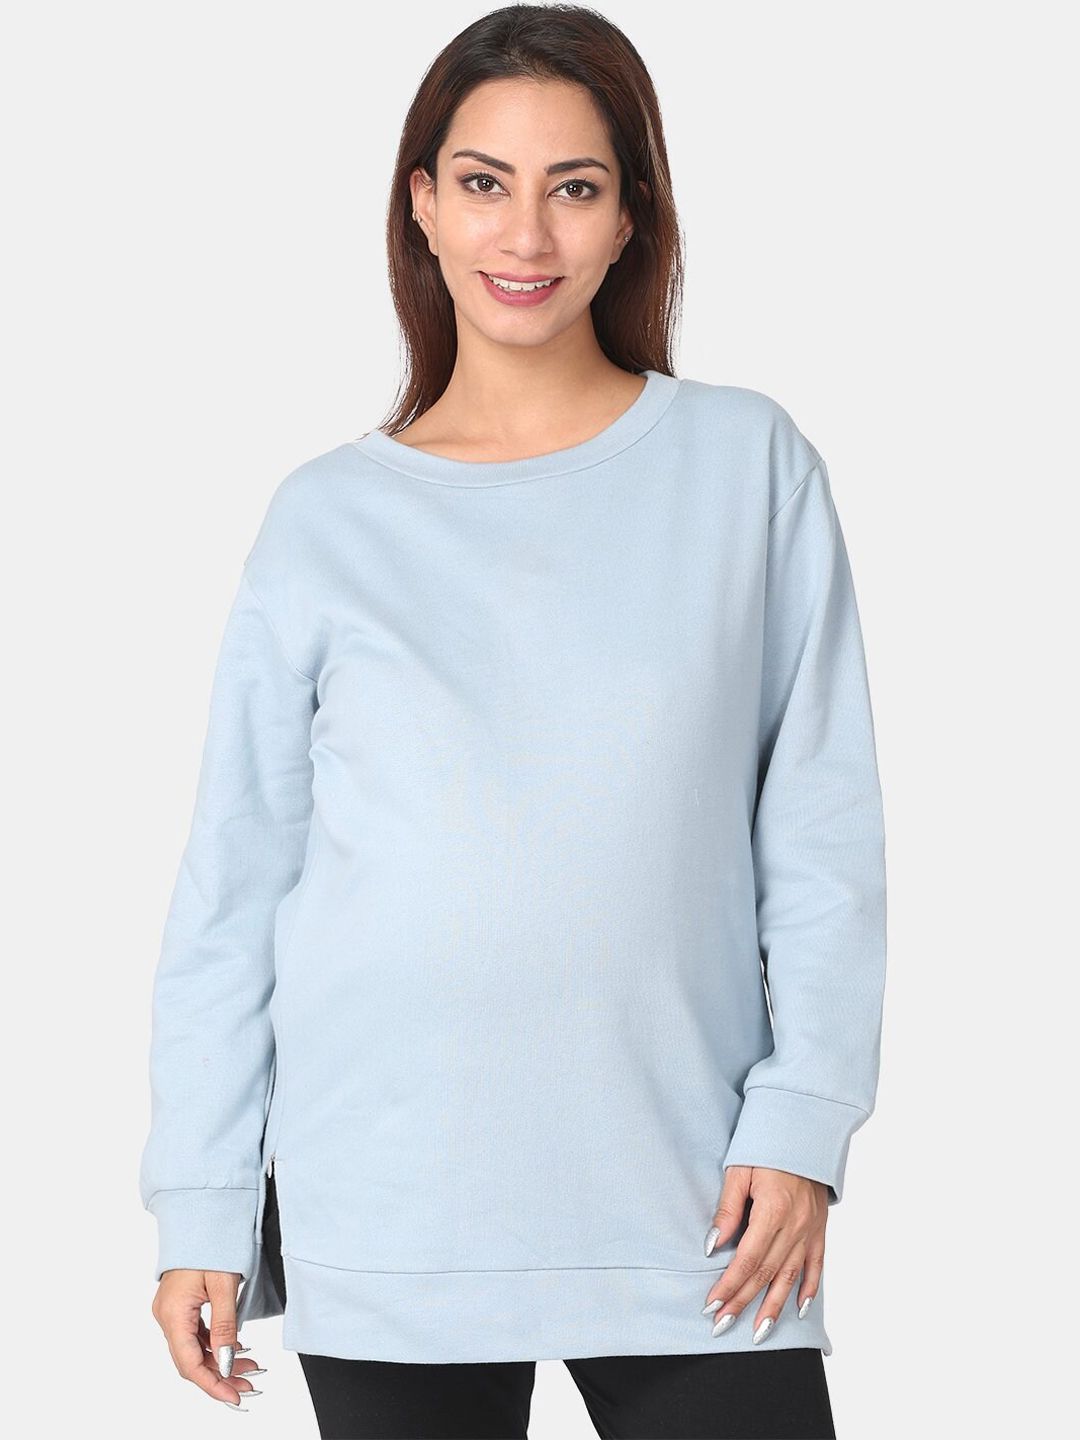 The Mom Store Women Blue Maternity and Feeding Sweatshirt Price in India